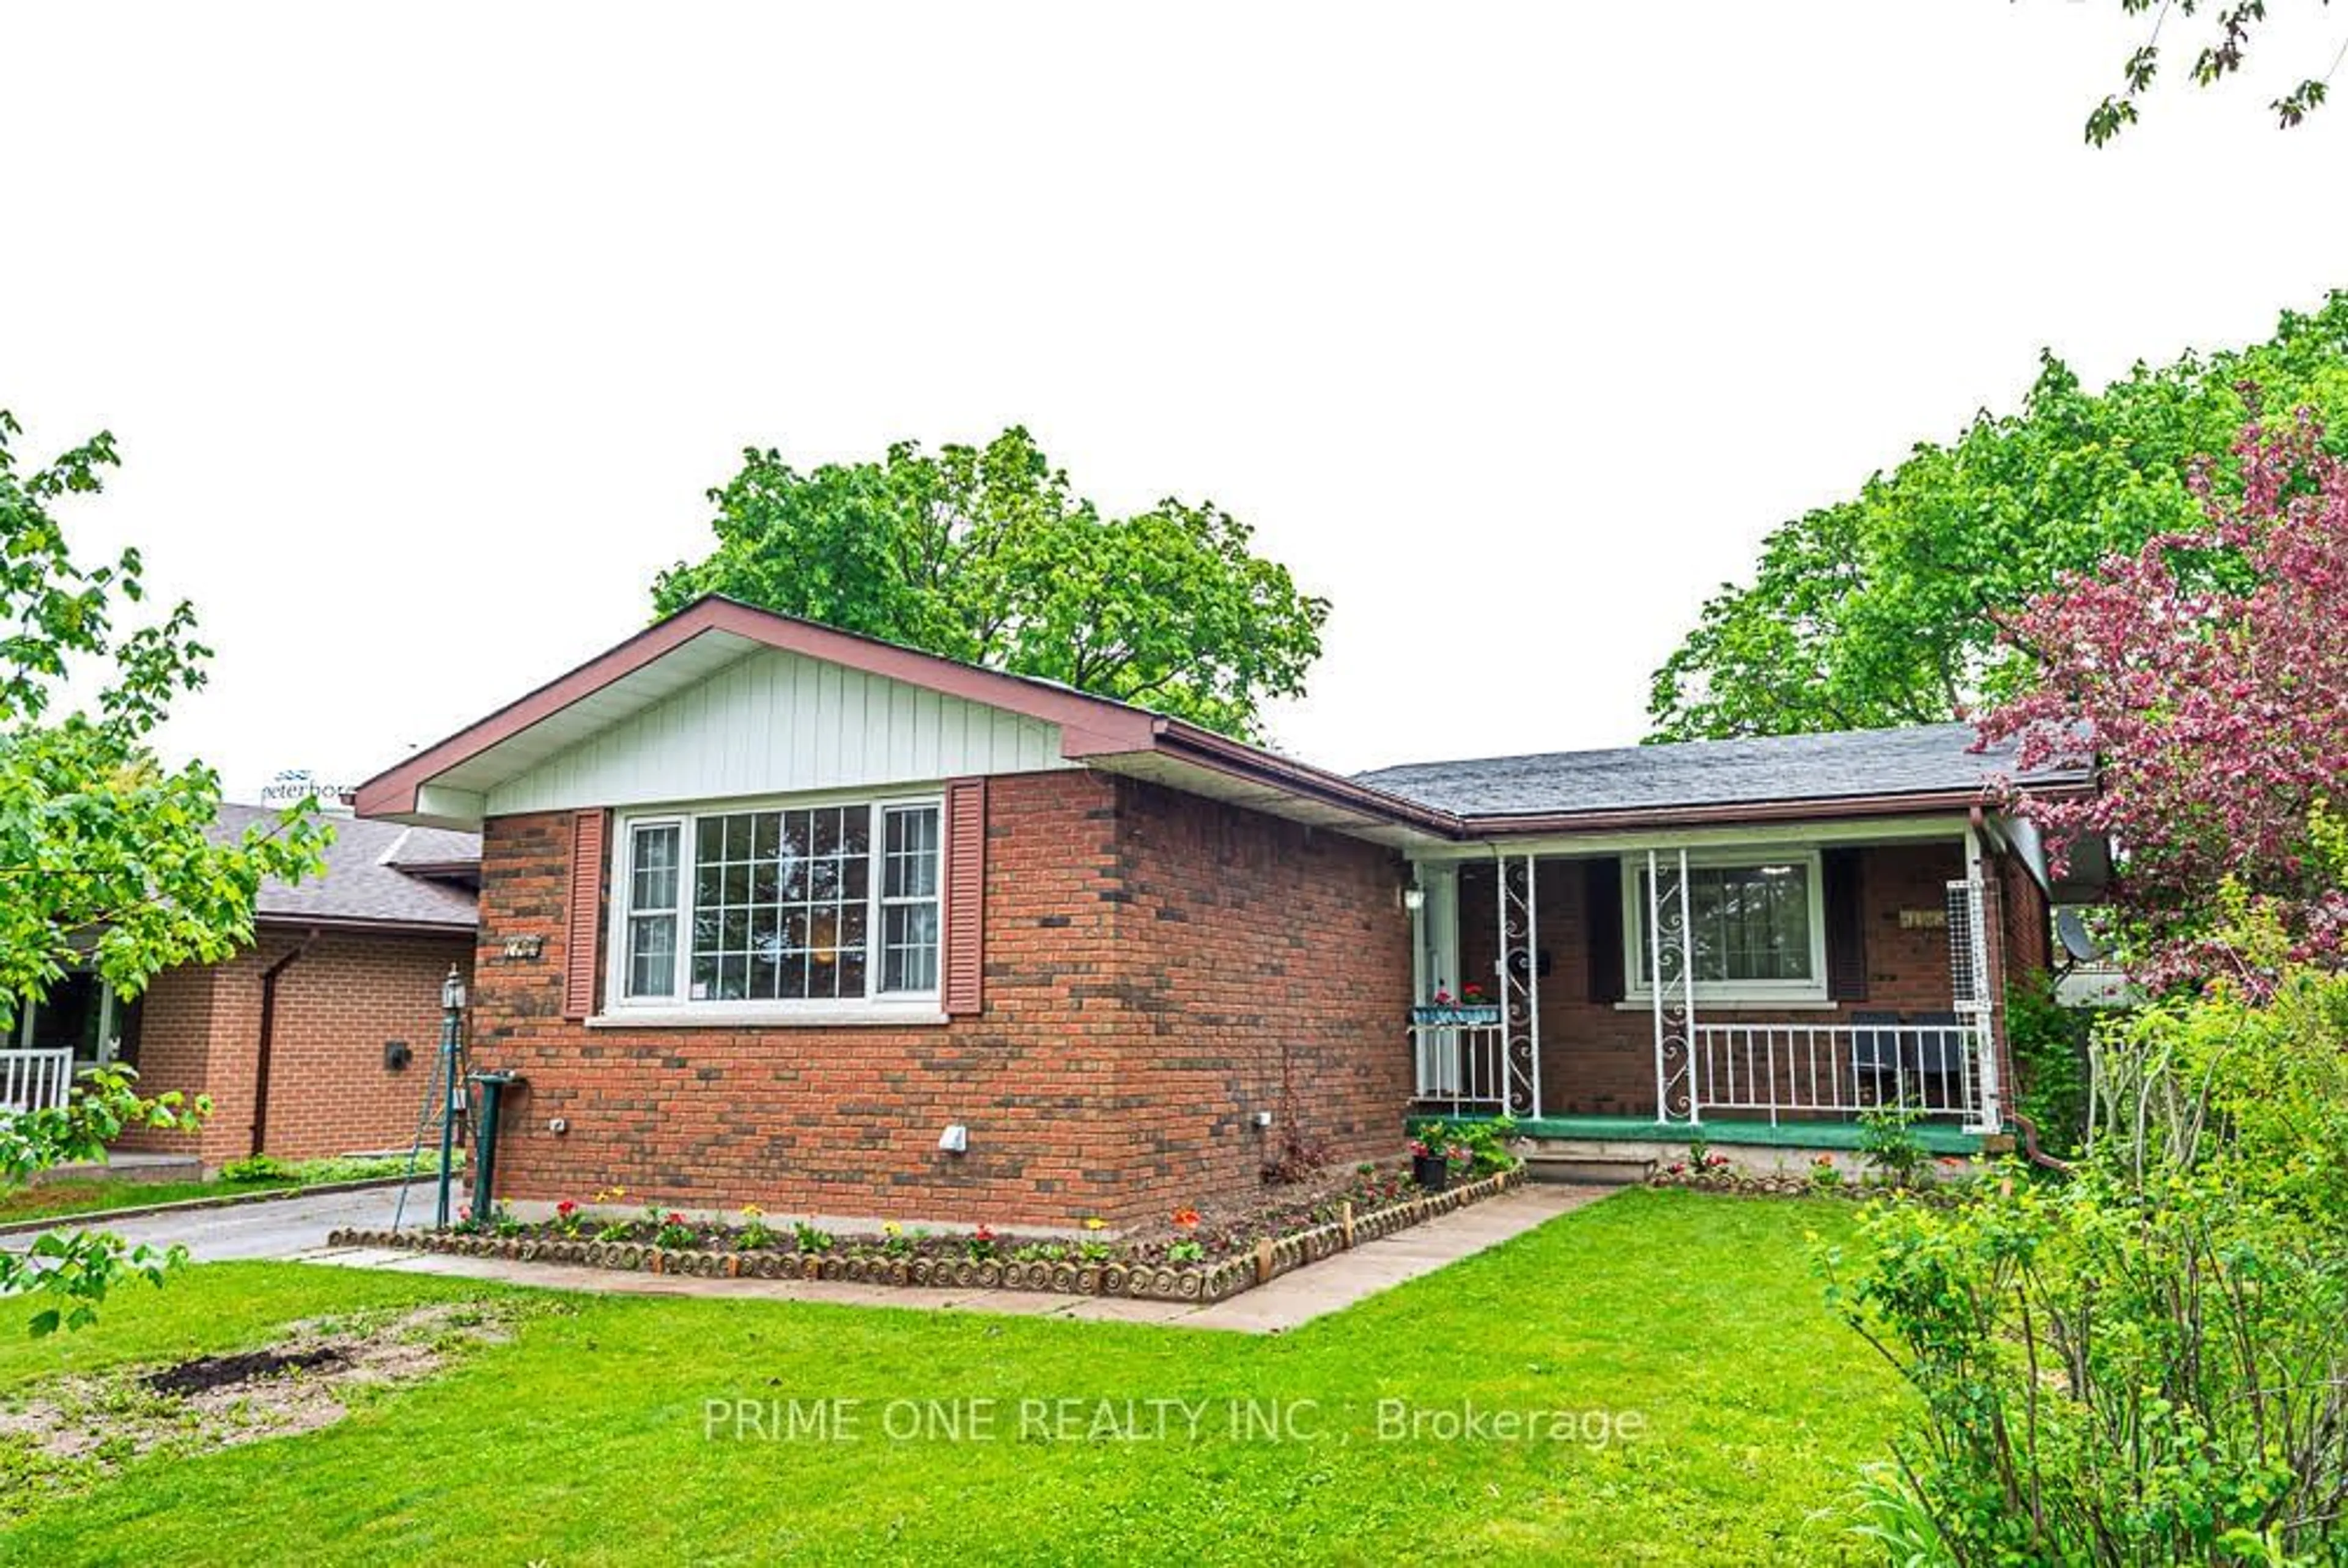 Home with brick exterior material for 1128 Hilltop St, Peterborough Ontario K9J 5S7